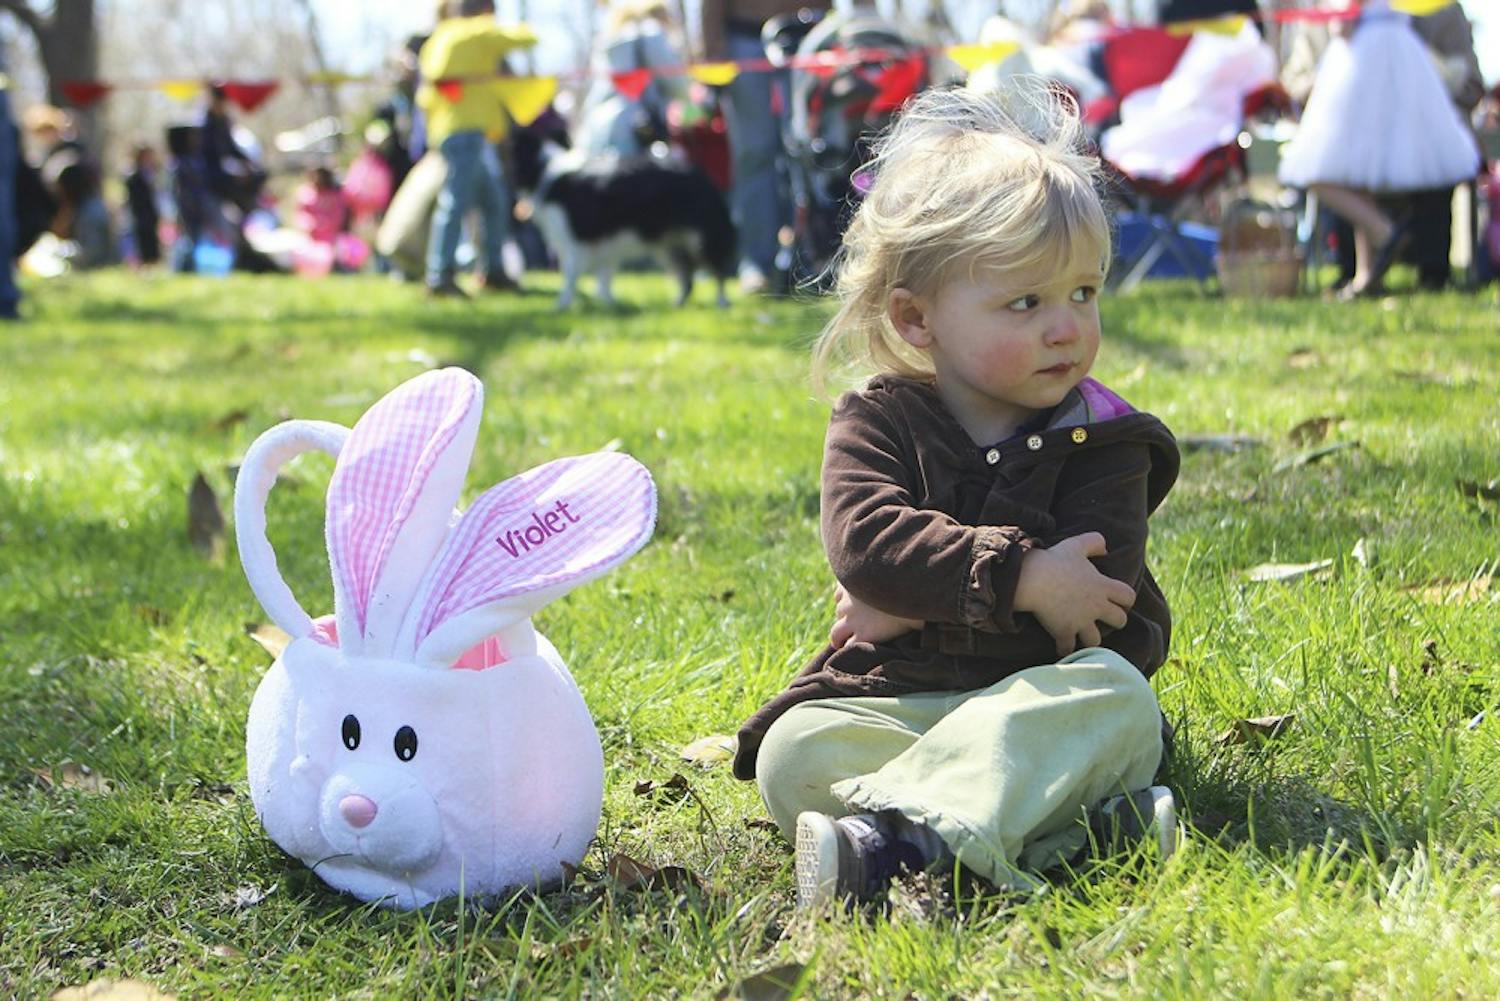 Violet Strickland of Hillsborough sits with her egg basket after the conclusion of Saturday’s egg hunt at River Park in Hillsborough. She found one egg.